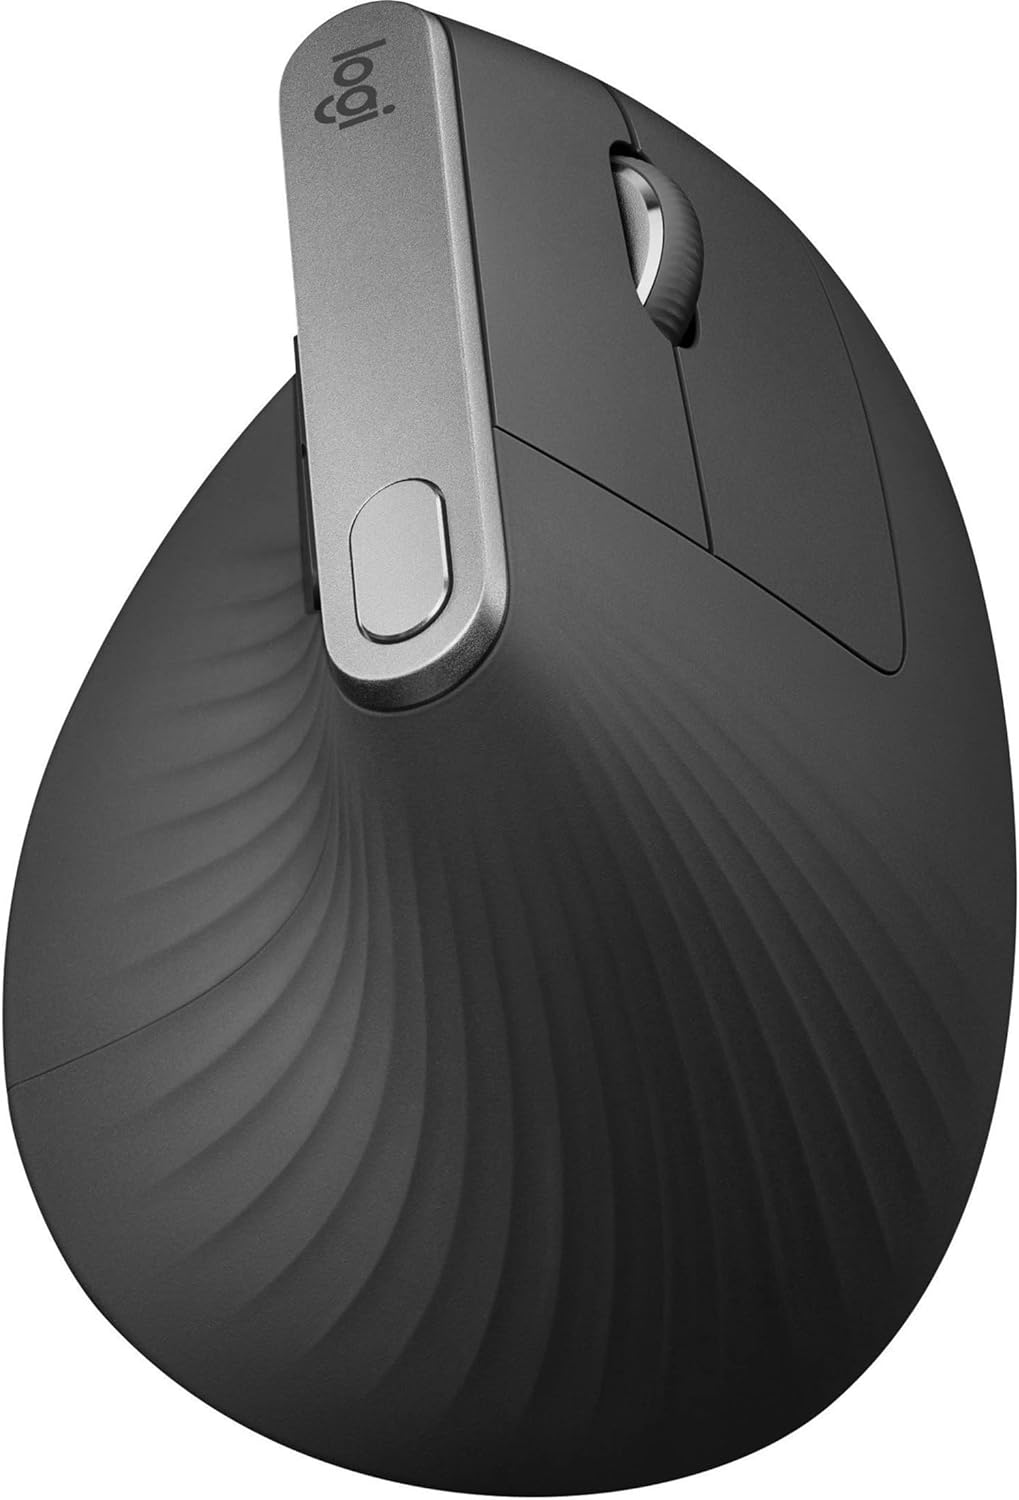 Logitech MX Vertical Wireless Mouse  Ergonomic Design Reduces Muscle Strain, Move Content Between 3 Windows and Apple Computers, Rechargeable, Graphite - With Free Adobe Creative Cloud Subscription